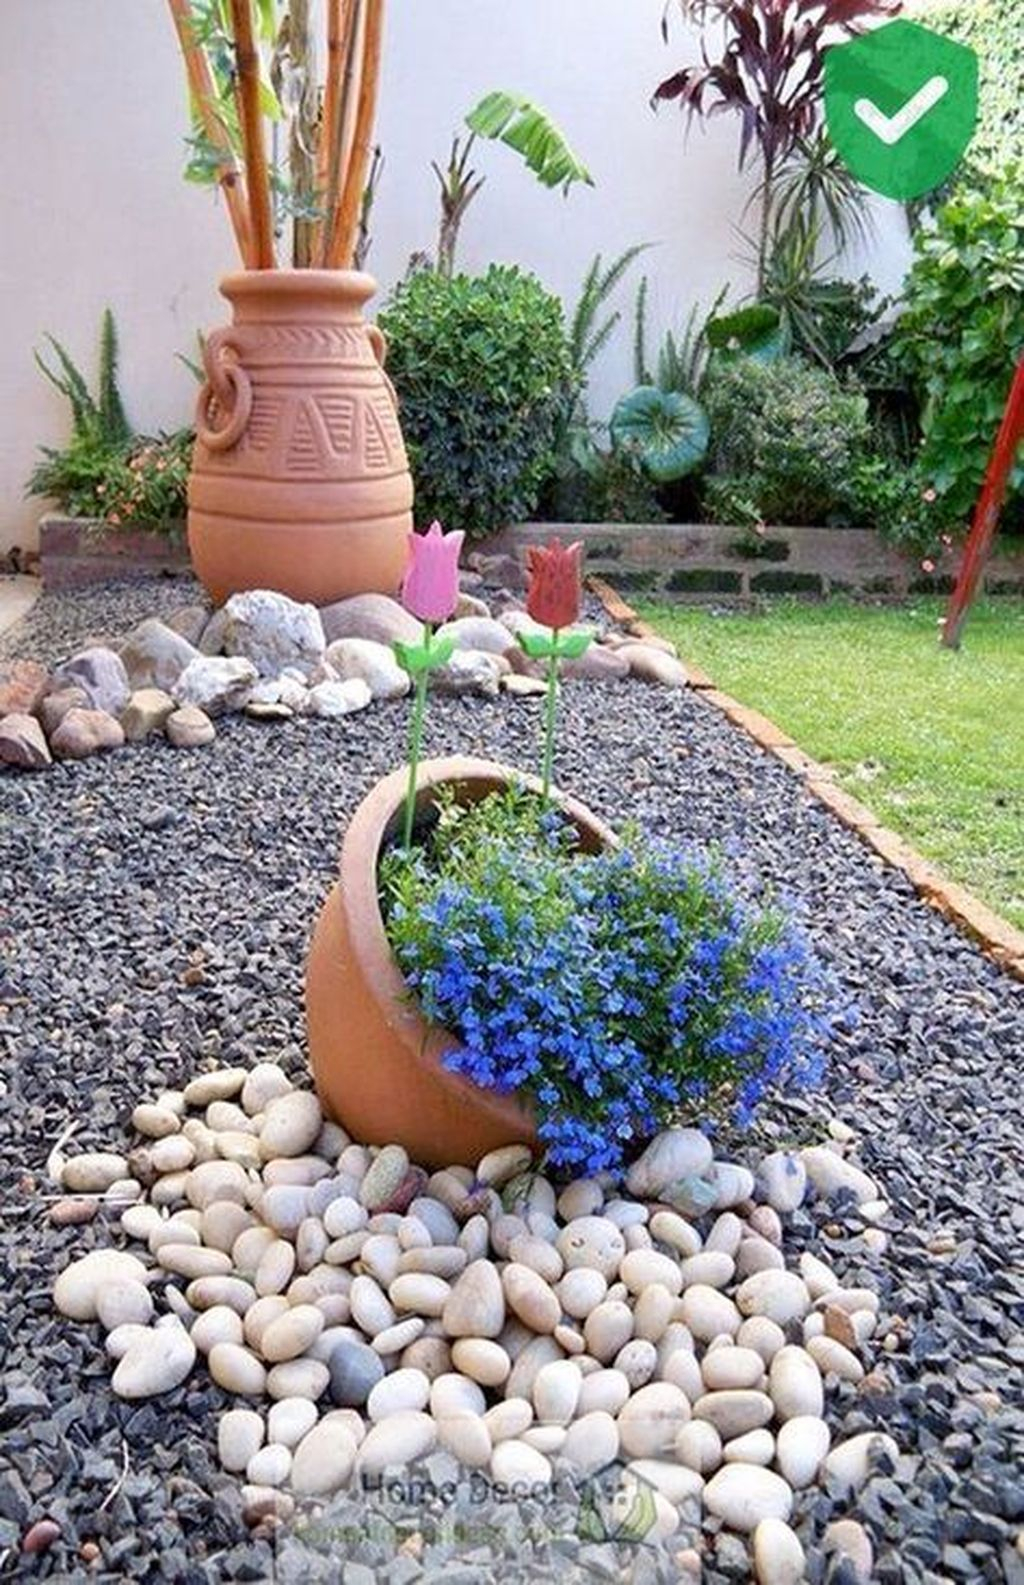 50 Beautiful Flower Beds Ideas For Home